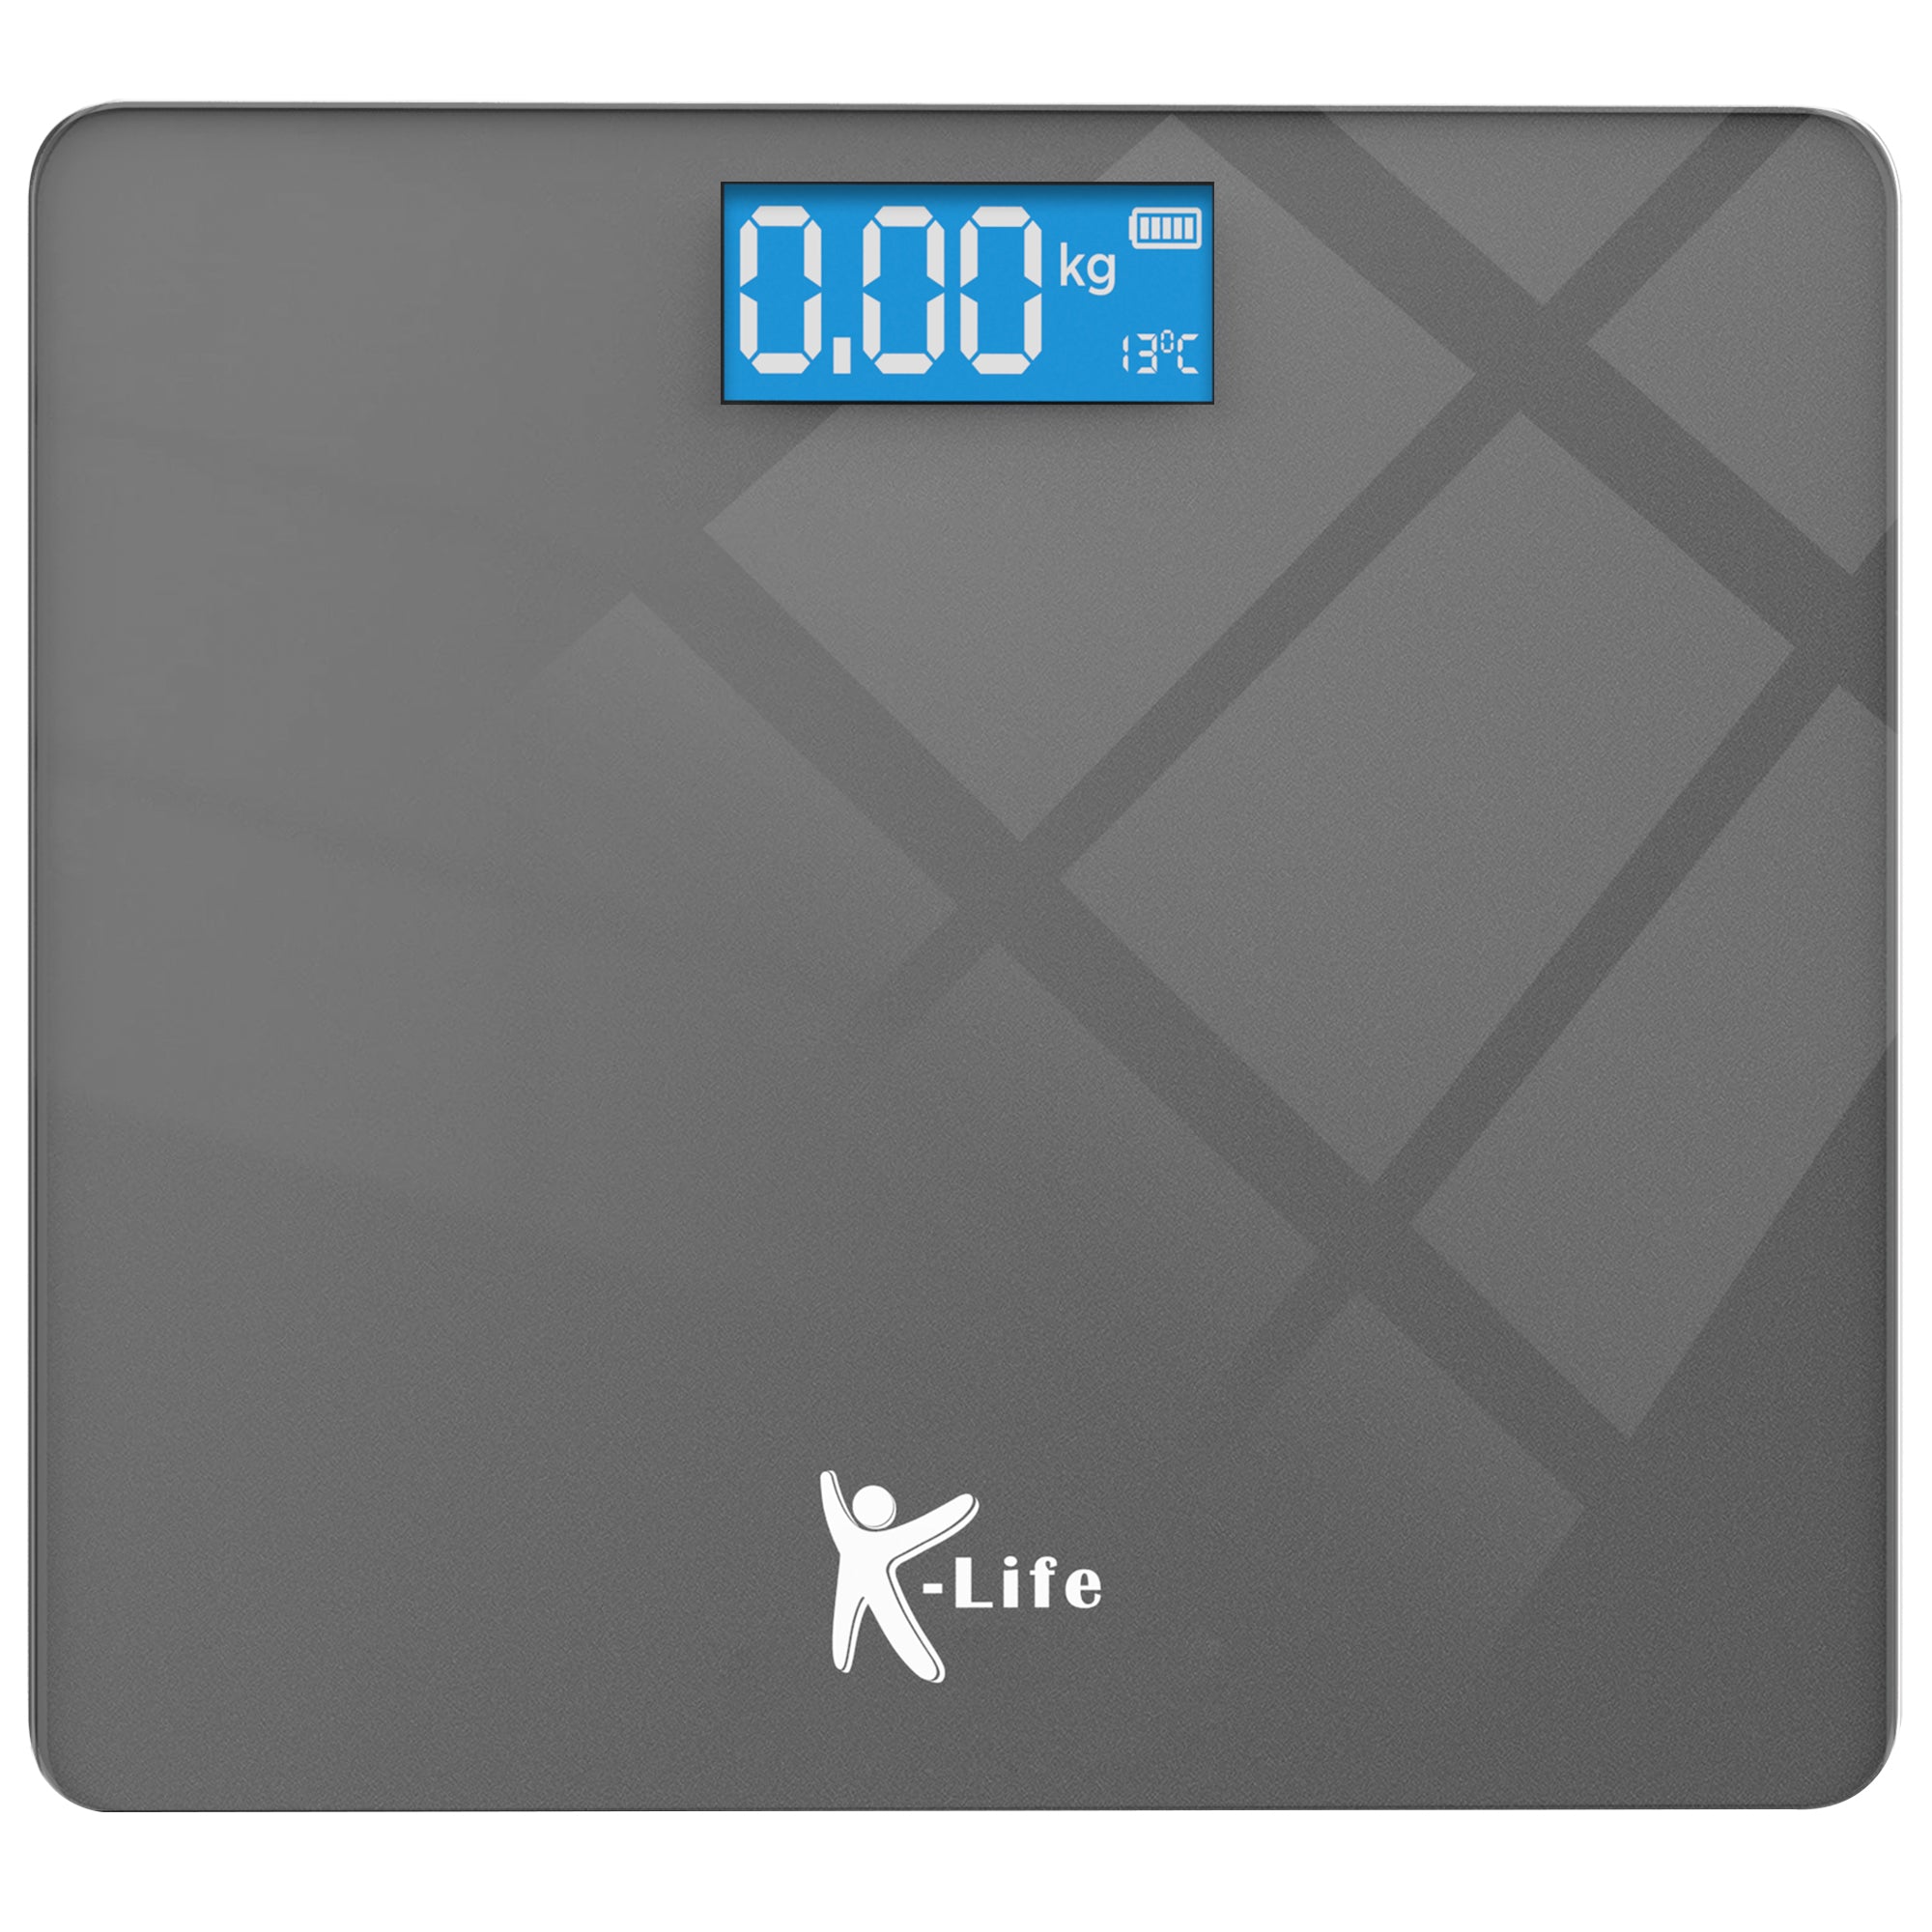 K-Life WS-101 Digital Personal Electronic Body Weight Machine for Human Body 180kg Capacity Weighing Scale, Grey